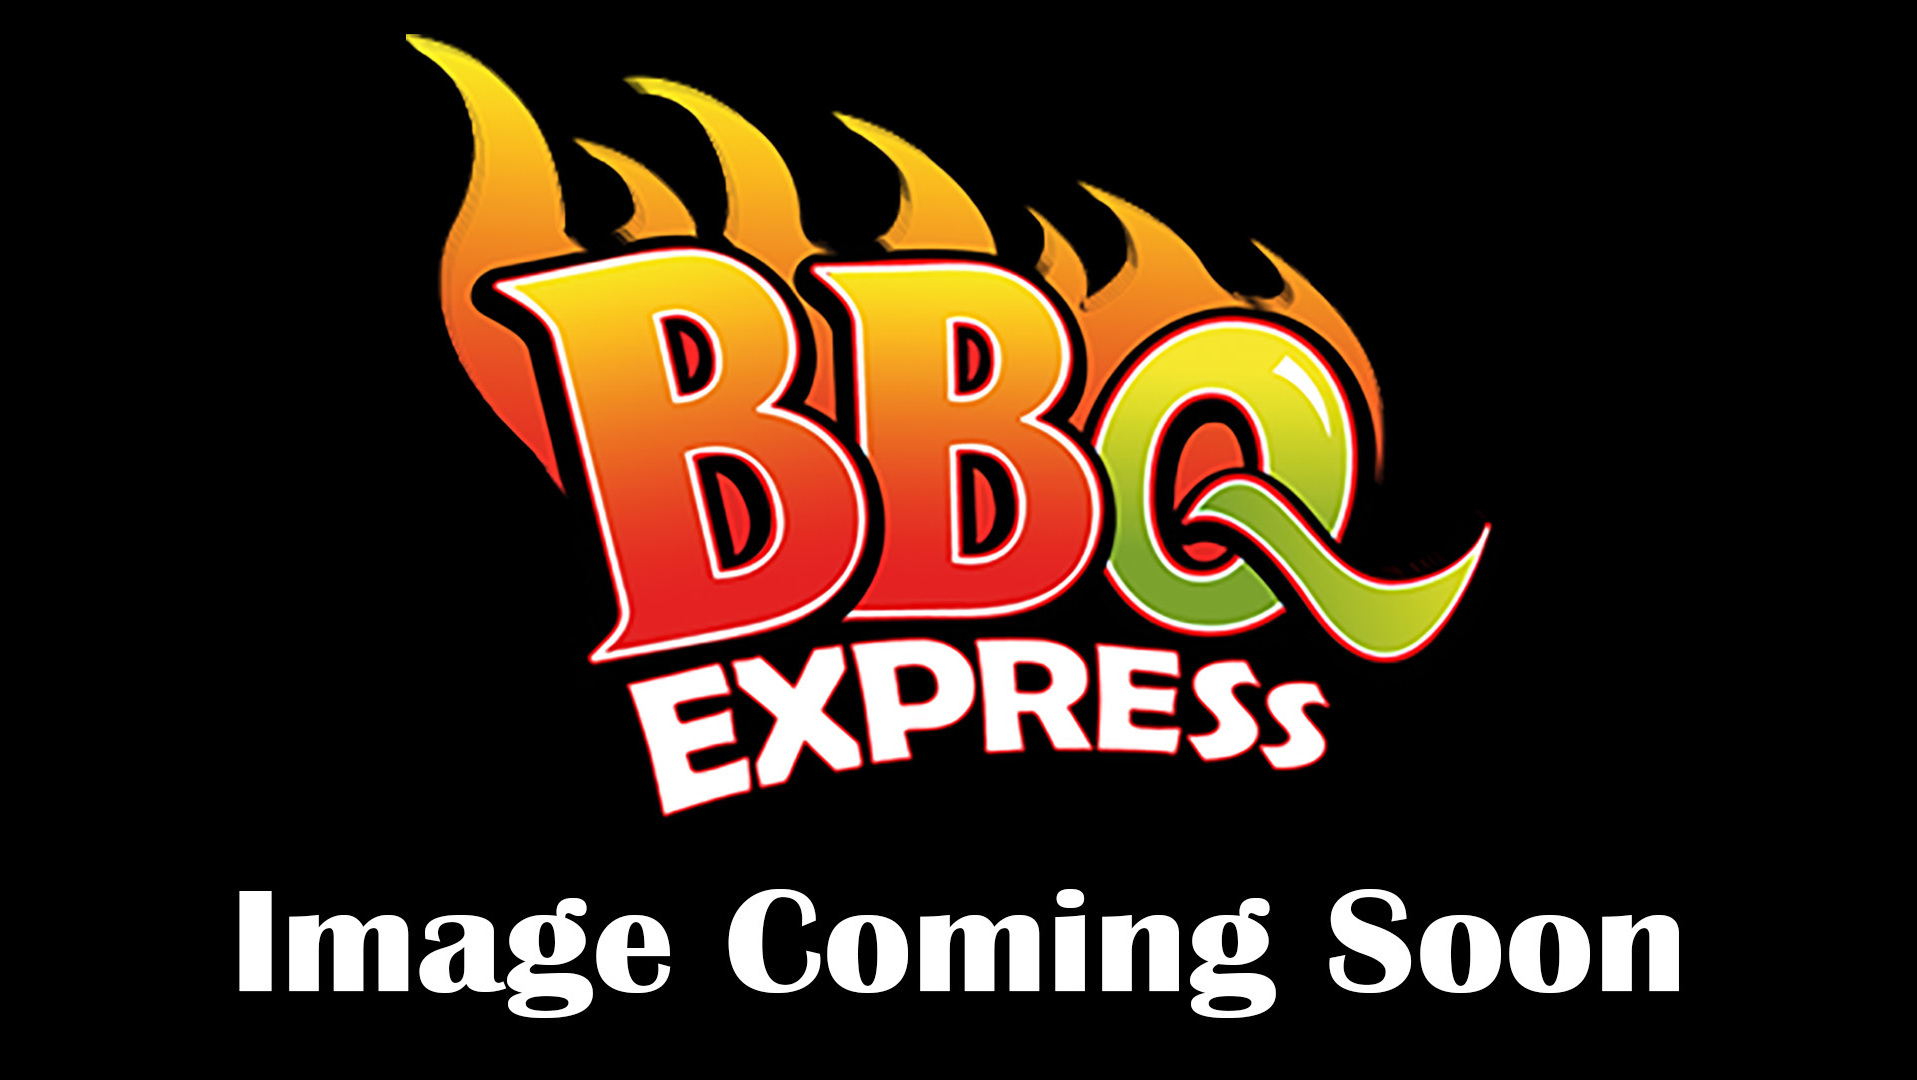 8 BBQ Wings - Wraps Delivery in Wanstead Flats E7